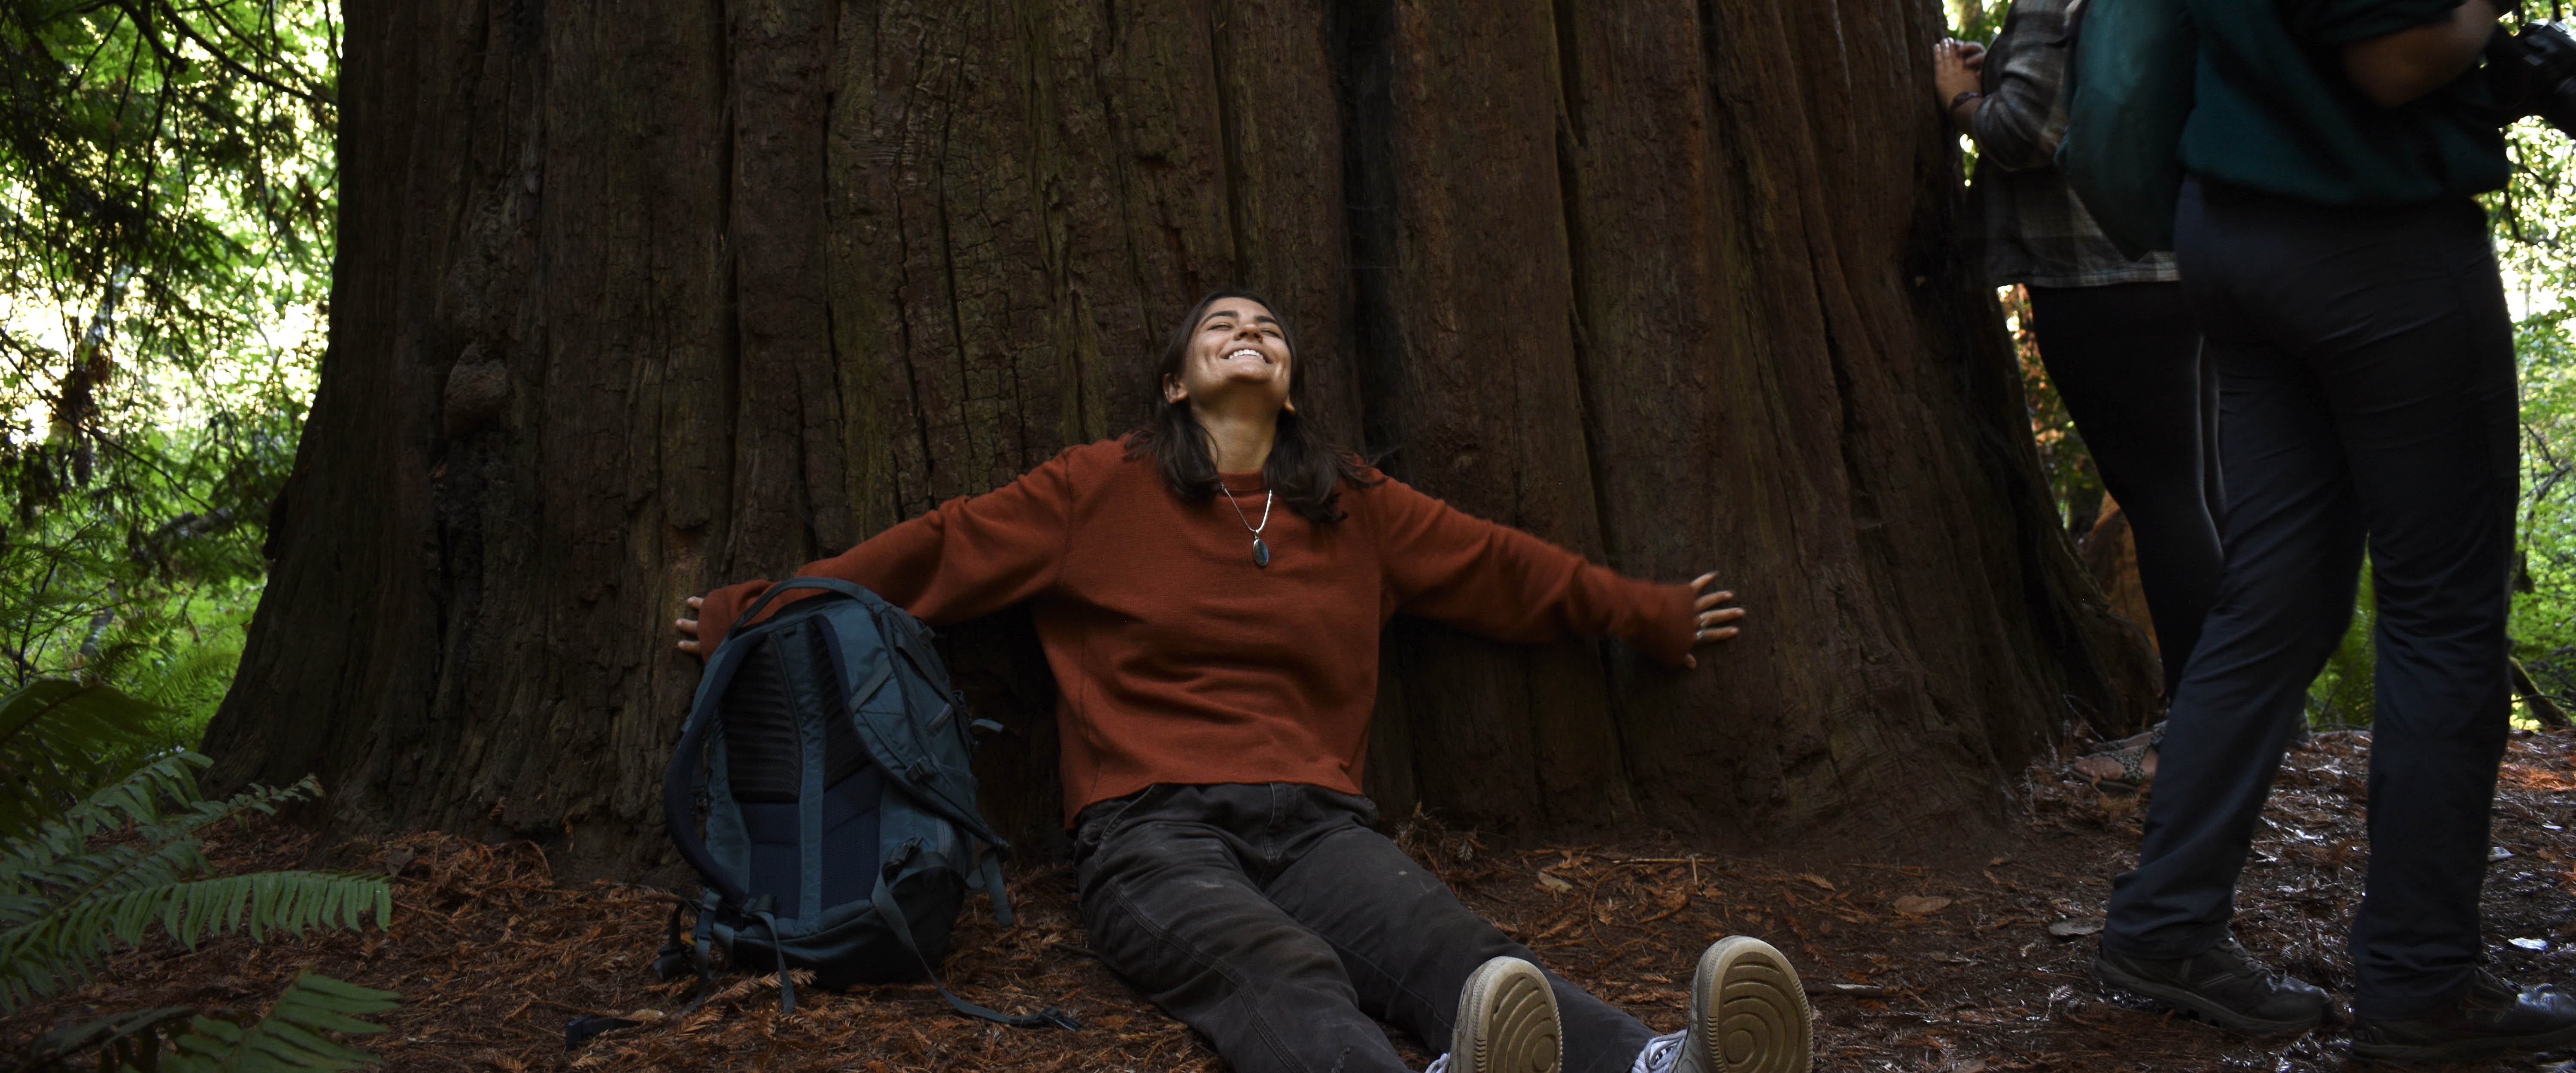 Belmont USA student sits against a large Red wood tree with her arms out and head looking up to the sky